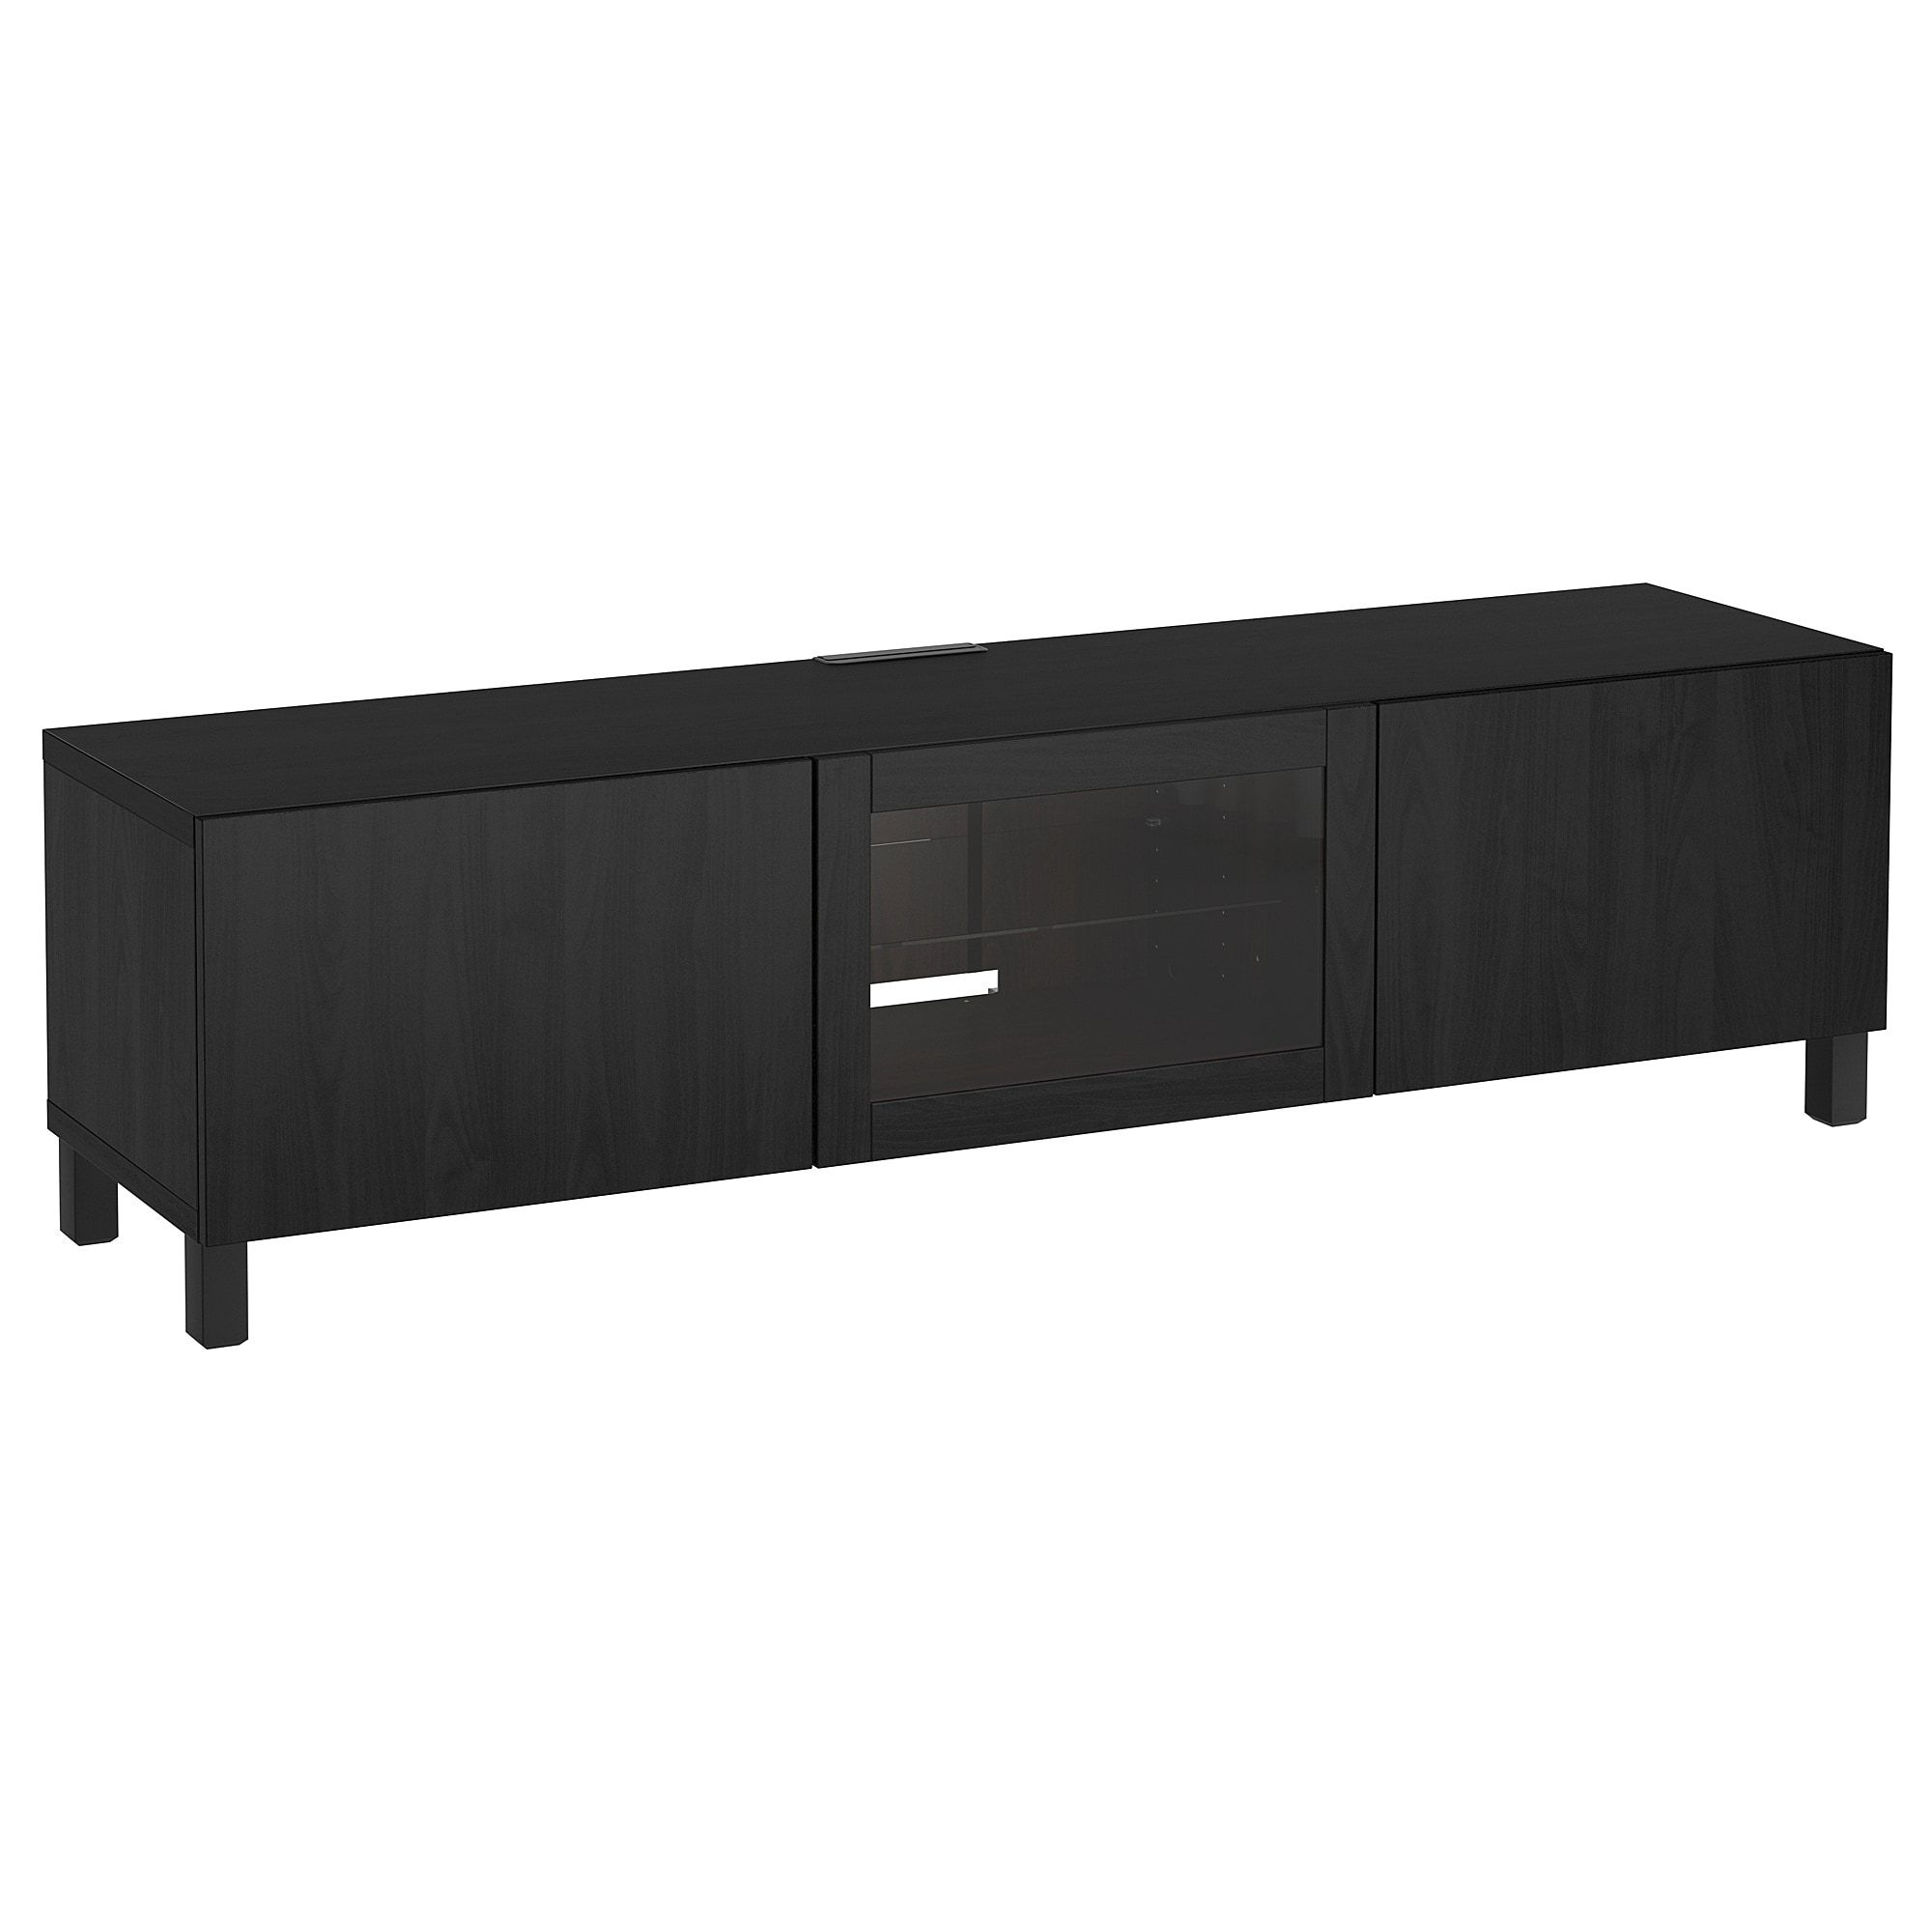 Black Tv Cabinets With Drawers For Newest Bestå Tv Unit With Drawers And Door – Lappviken Black Brown Clear (View 4 of 20)